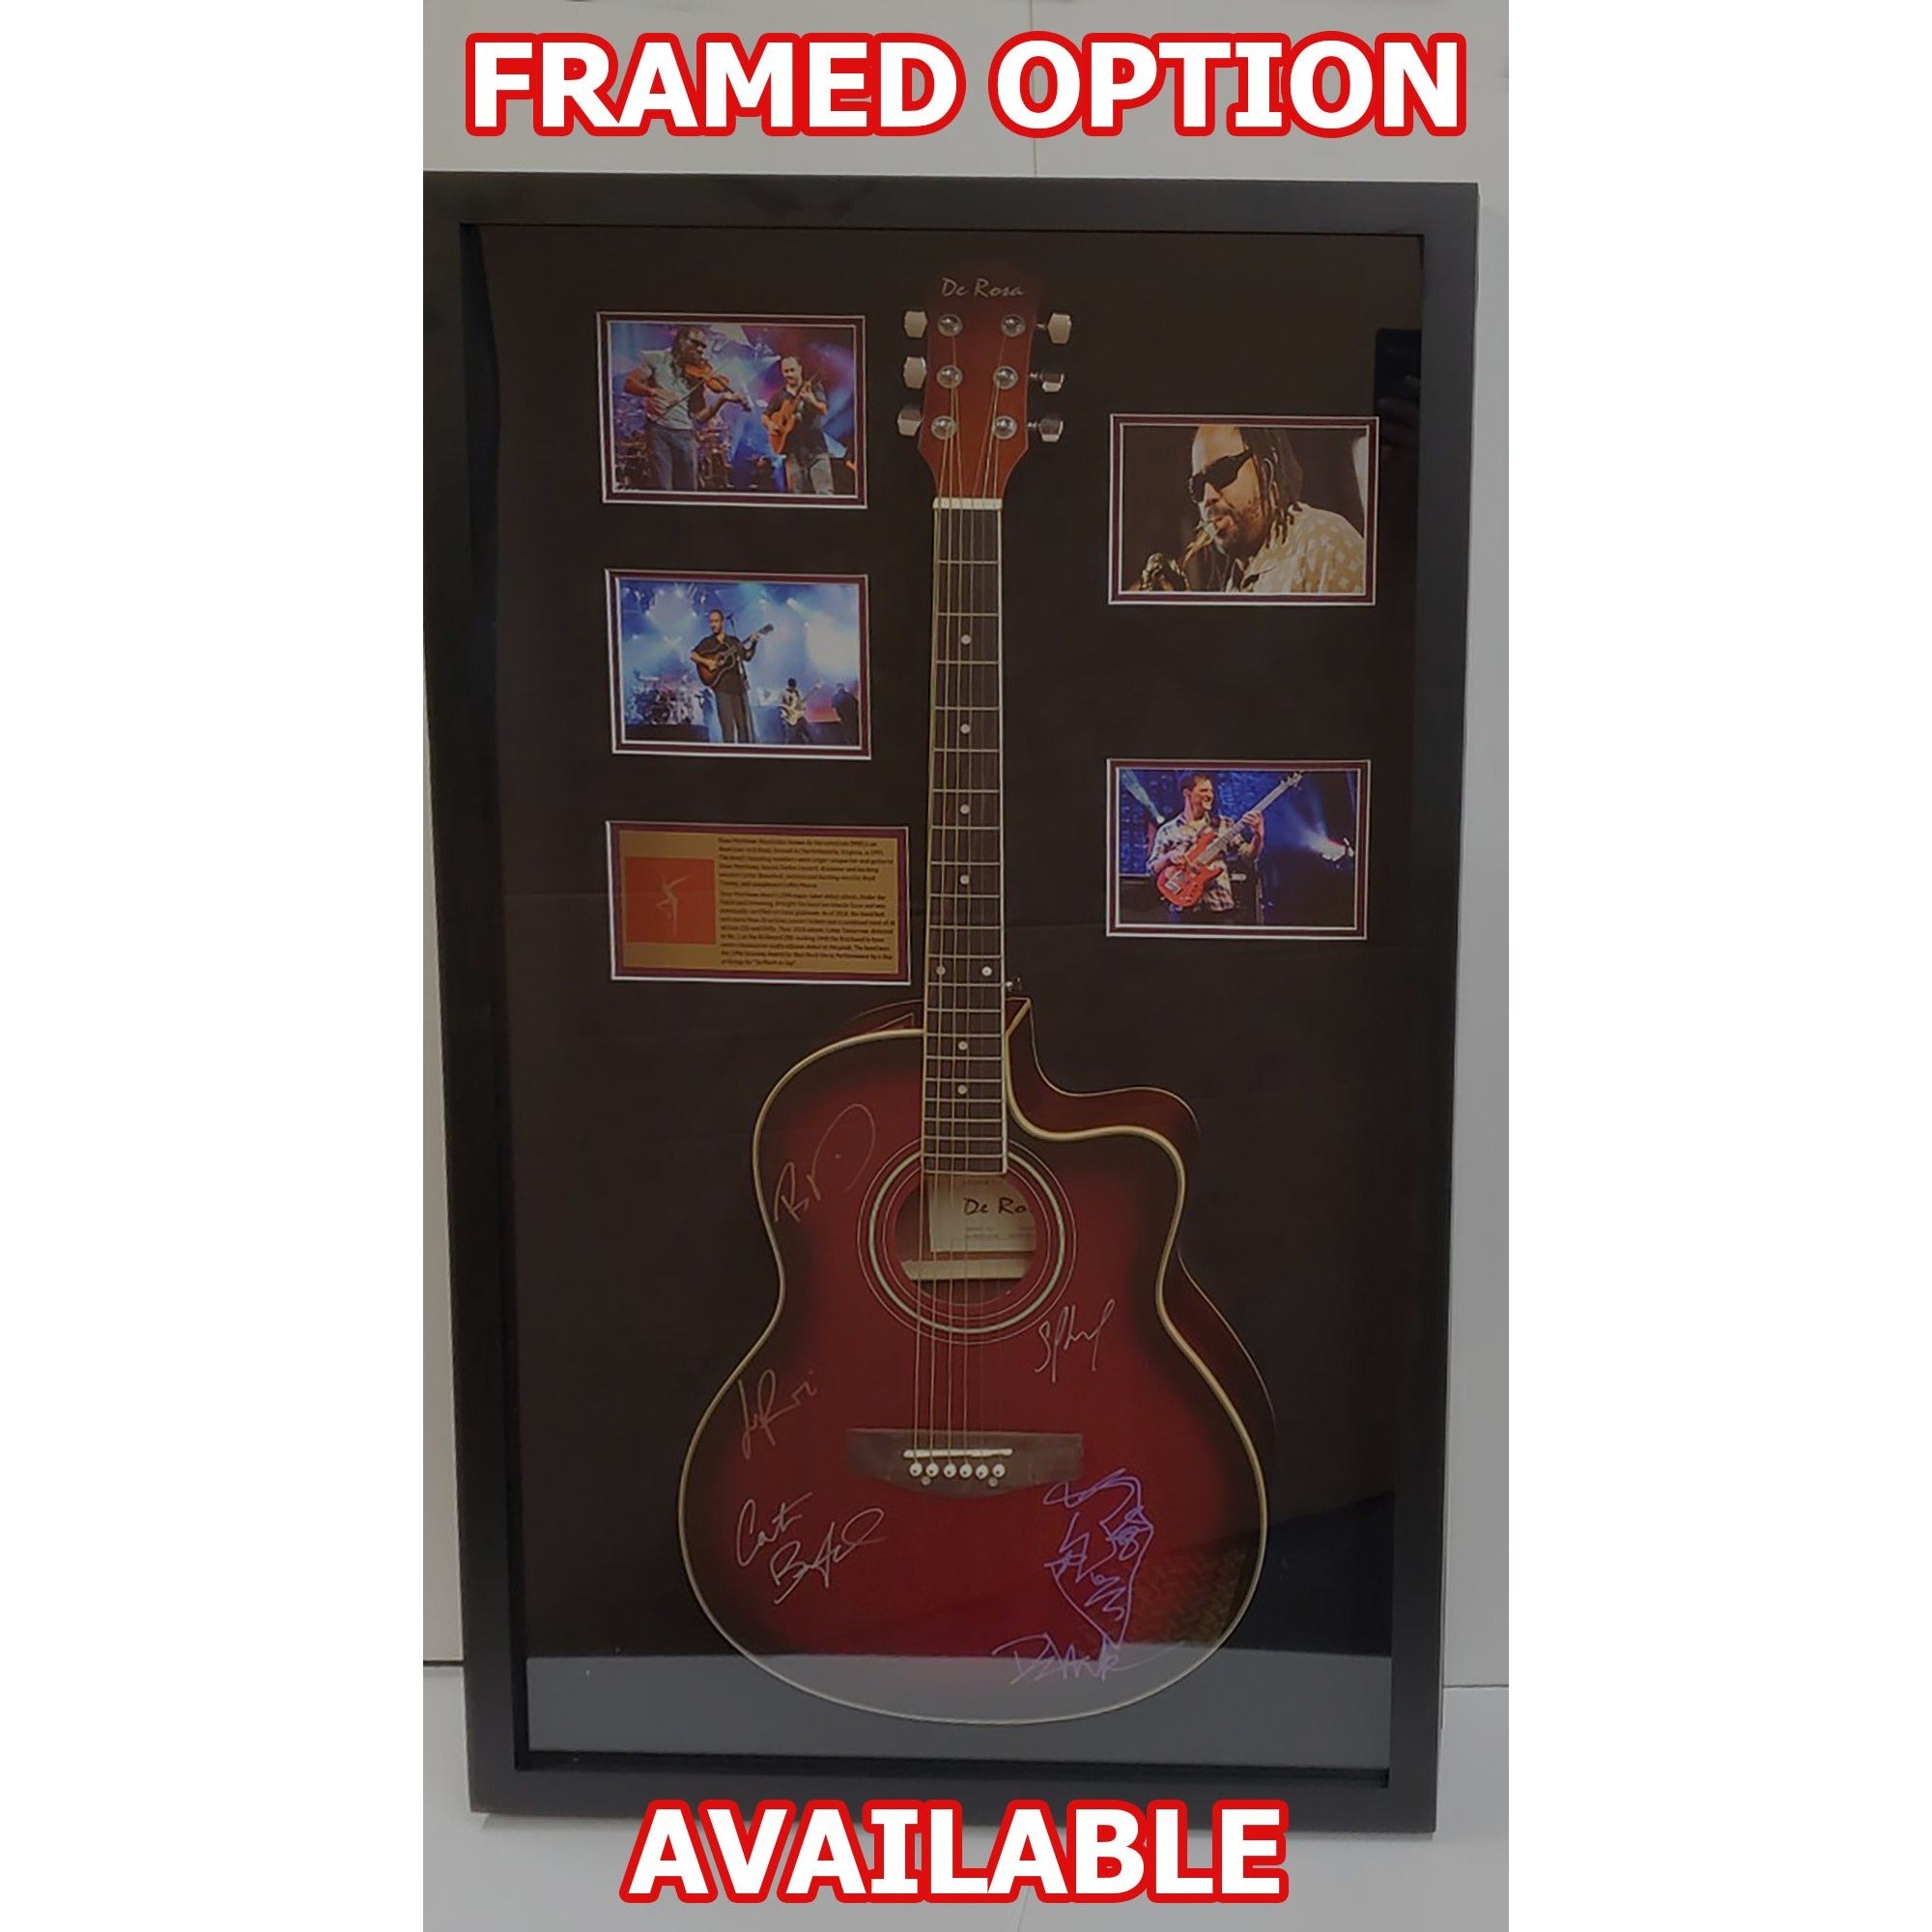 Led Zeppelin Robert Plant Jimmy Page John Paul Jones One of a Kind full size acoustic guitar signed with proof